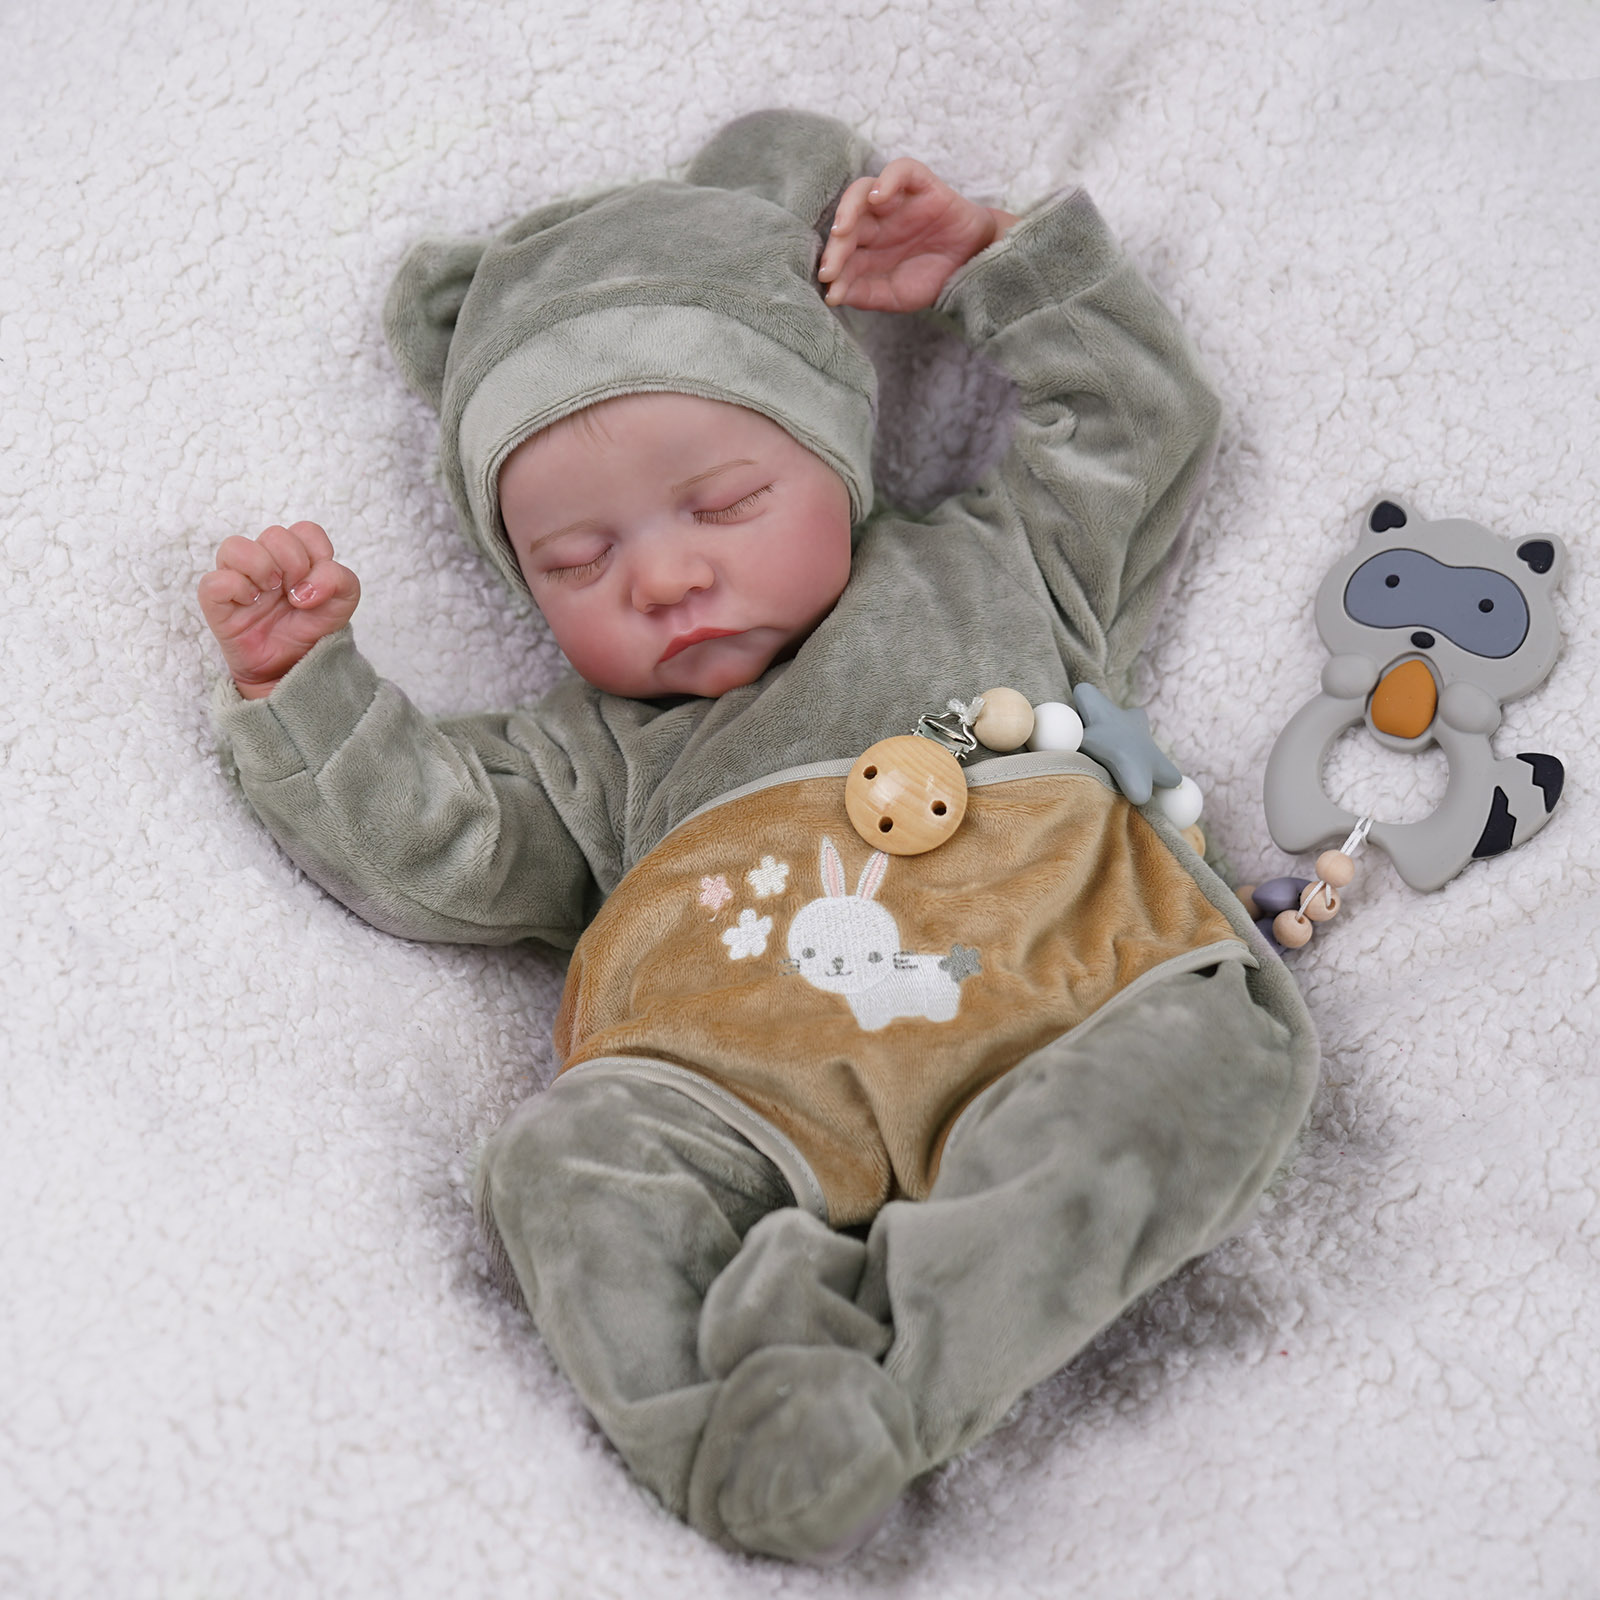 Emma, Author at Realistic Reborn Dolls for Sale  Cheap Lifelike Silicone  Newborn Baby Doll - Page 897 of 1121